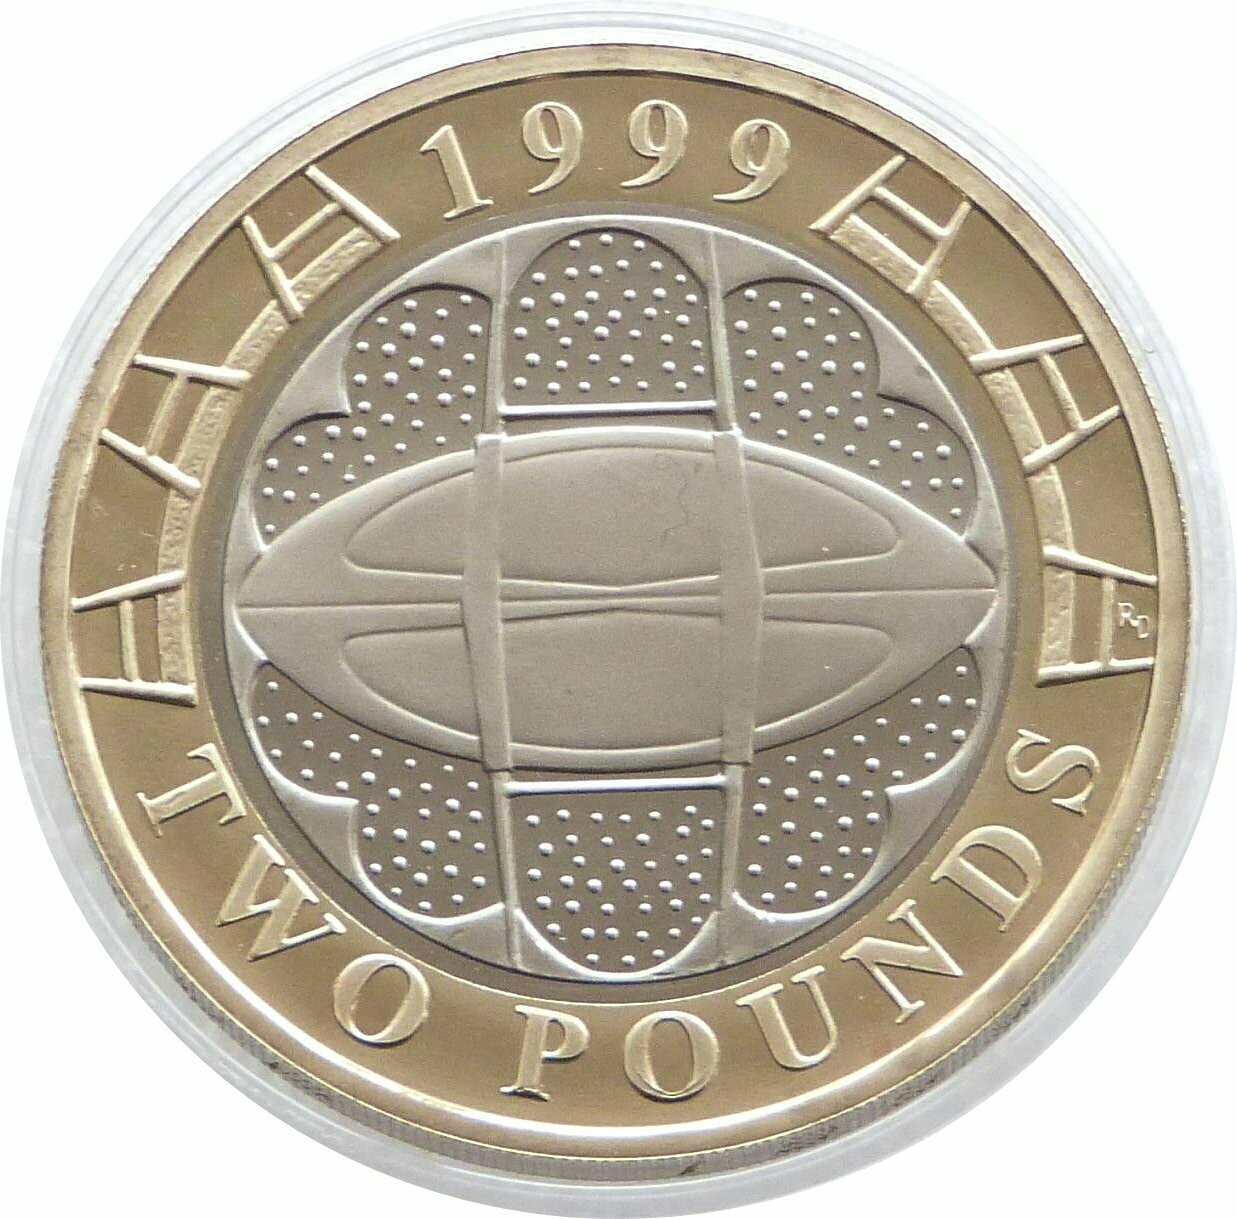 1999 Rugby World Cup £2 Proof Coin